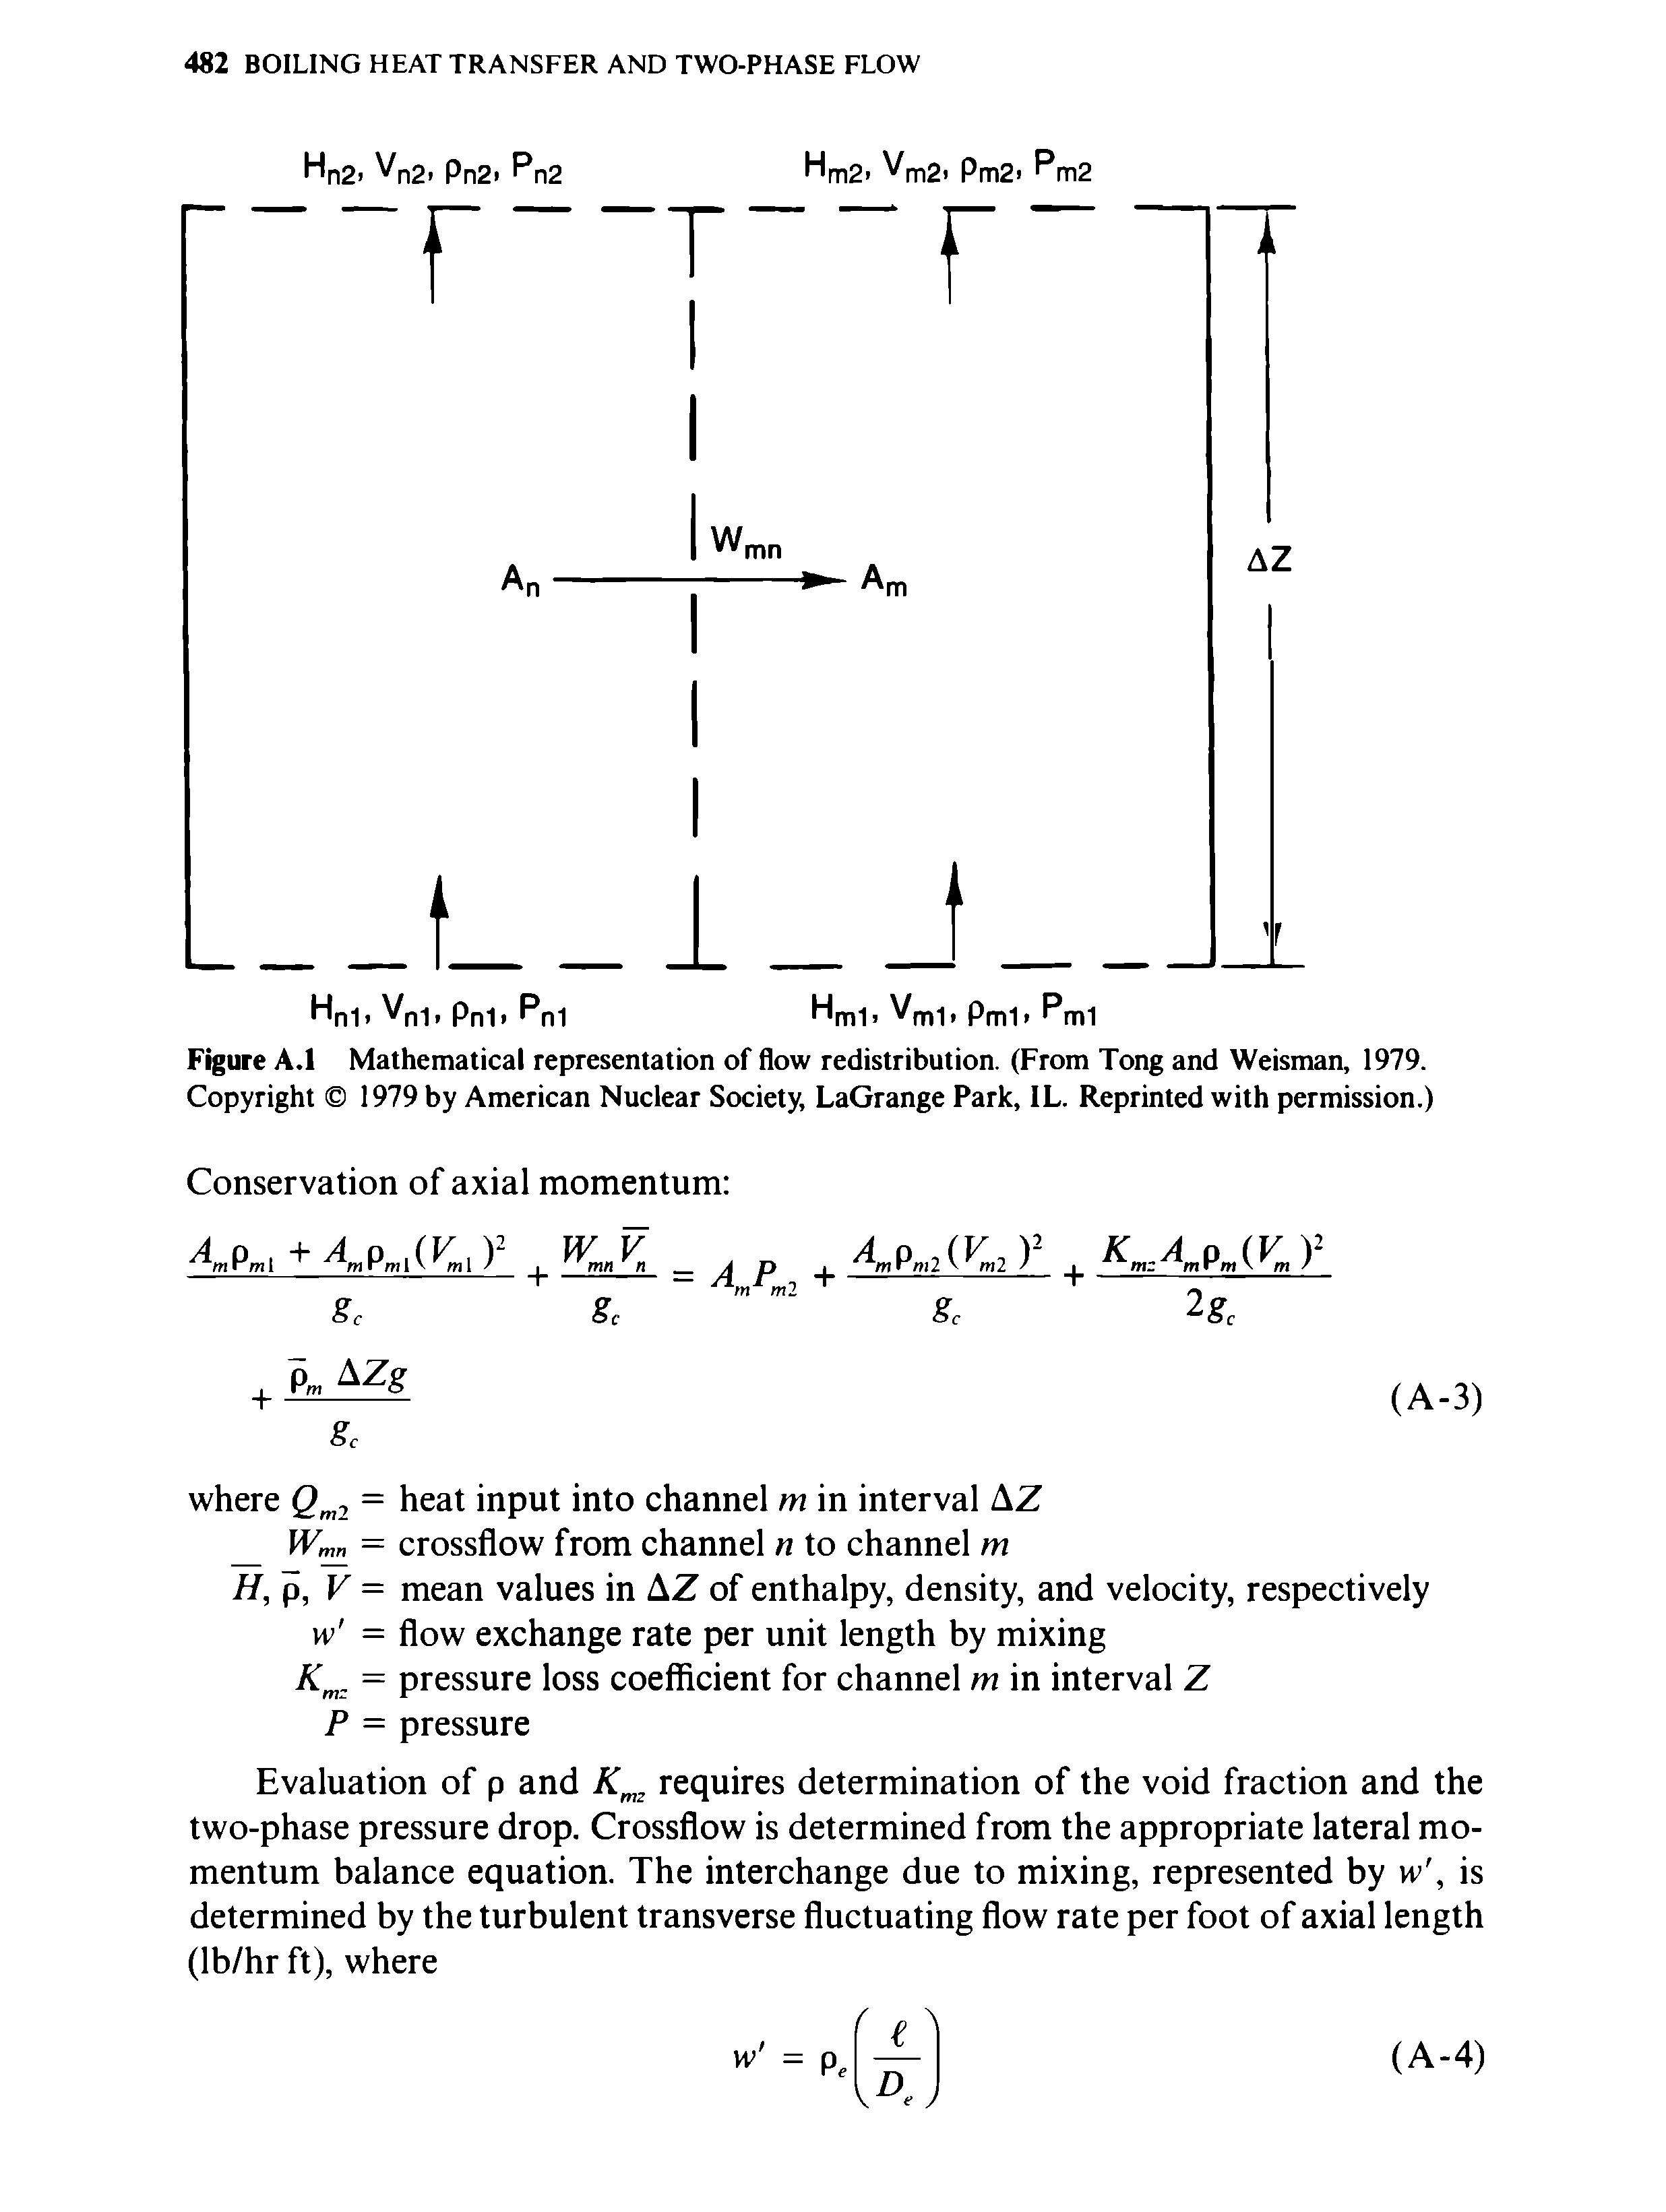 Figure A.l Mathematical representation of flow redistribution. (From Tong and Weisman, 1979. Copyright 1979 by American Nuclear Society, LaGrange Park, IL. Reprinted with permission.)...